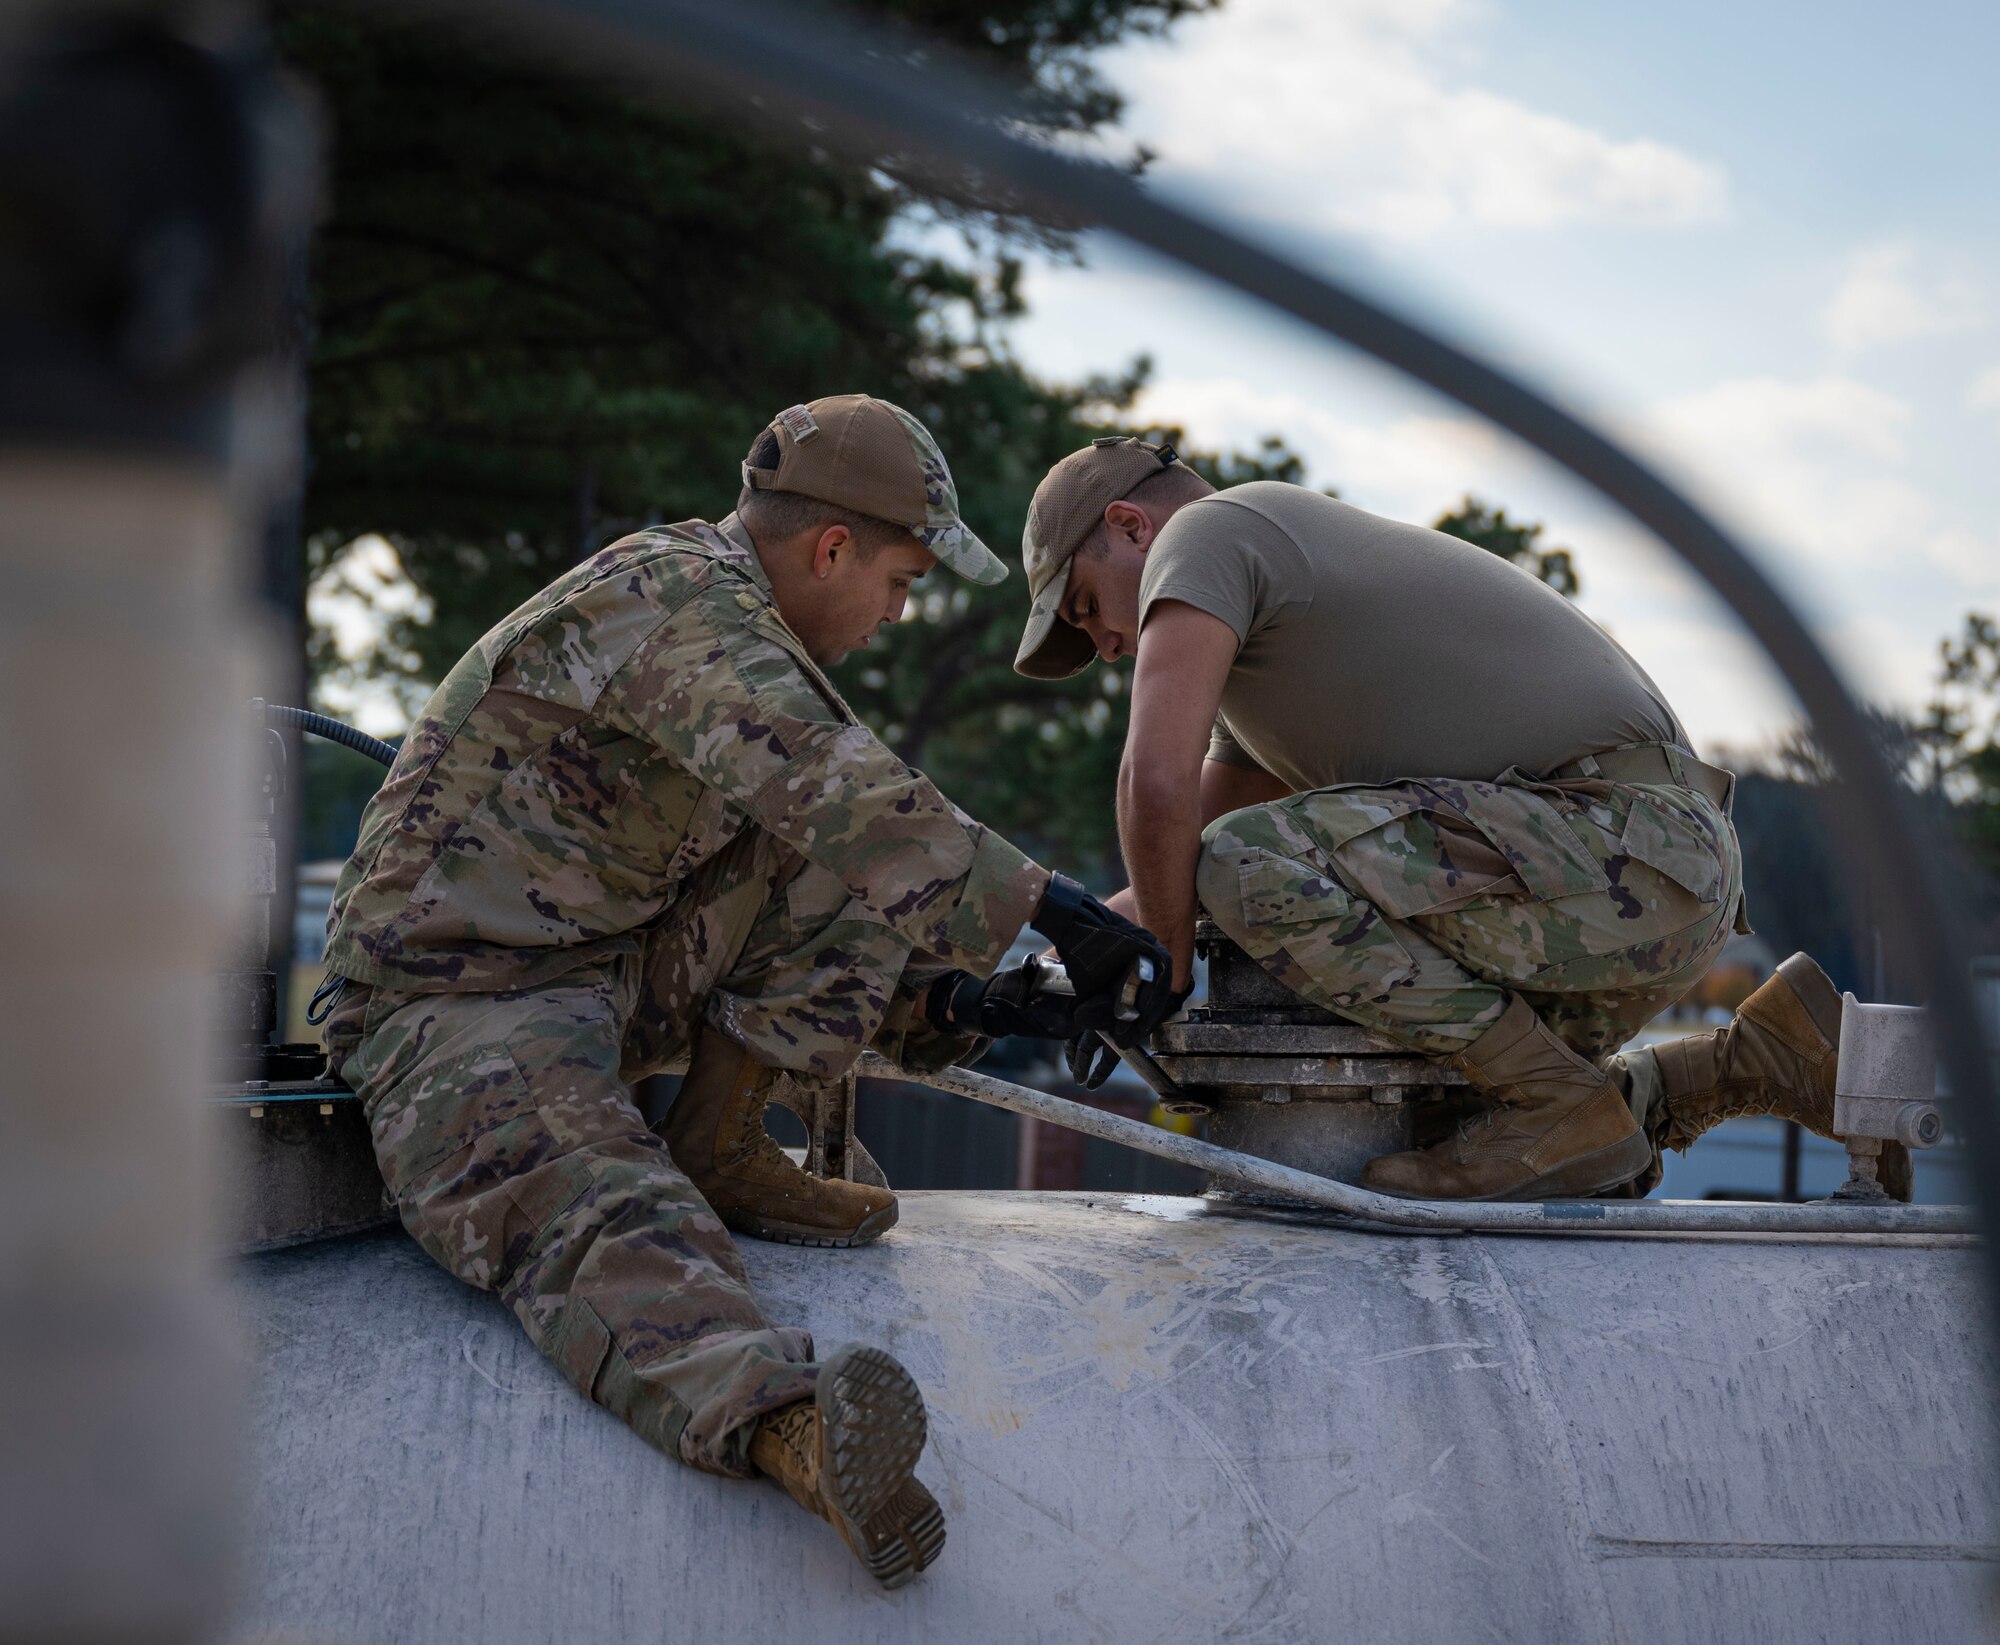 Senior Airman Justin Bellivan, left, and Staff Sgt. Christian Munoz-Alvarez, 4th Civil Engineer Squadron liquid fuels maintenance technicians, replace an emergency vent on a fuel tank at Seymour Johnson Air Force Base, North Carolina, Dec. 13, 2022. The fuel tanks can hold diesel fuel or motor vehicle unleaded regular fuel.